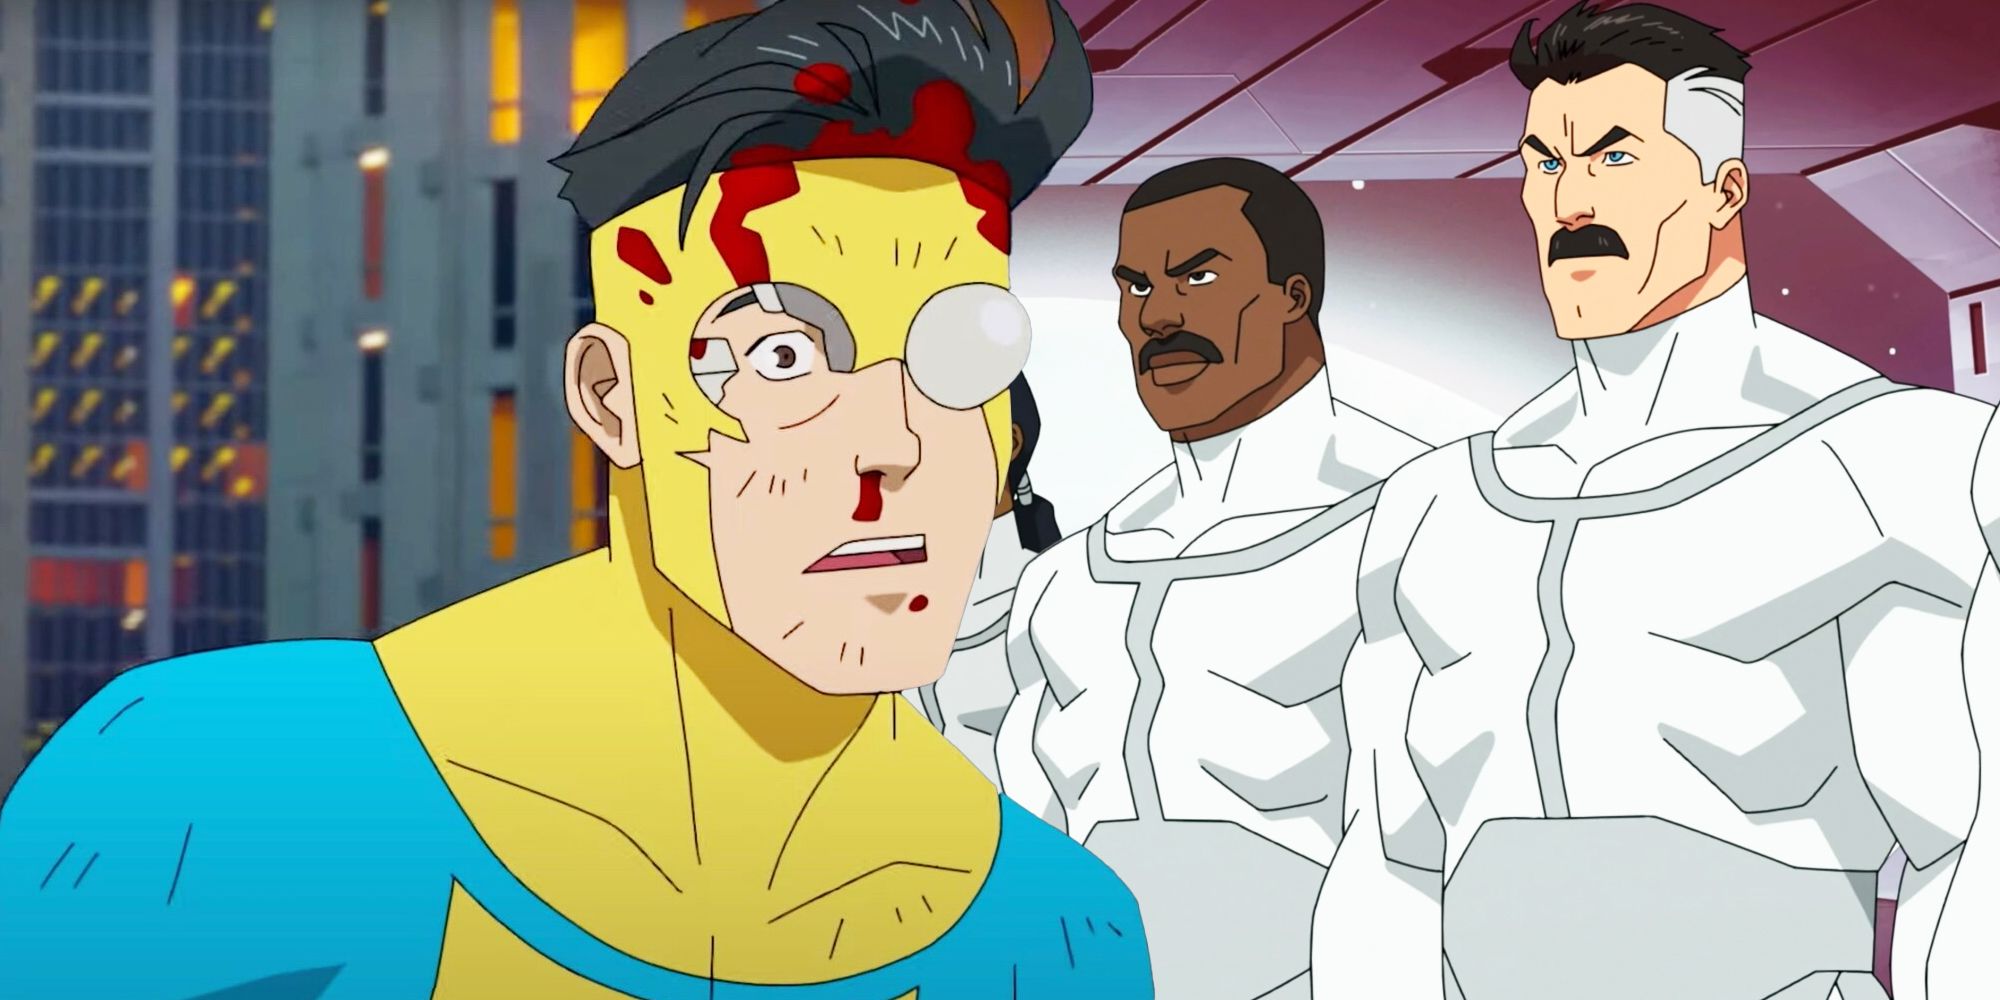 Invincible Season 2, Episode 3 Biggest Changes from the Comic